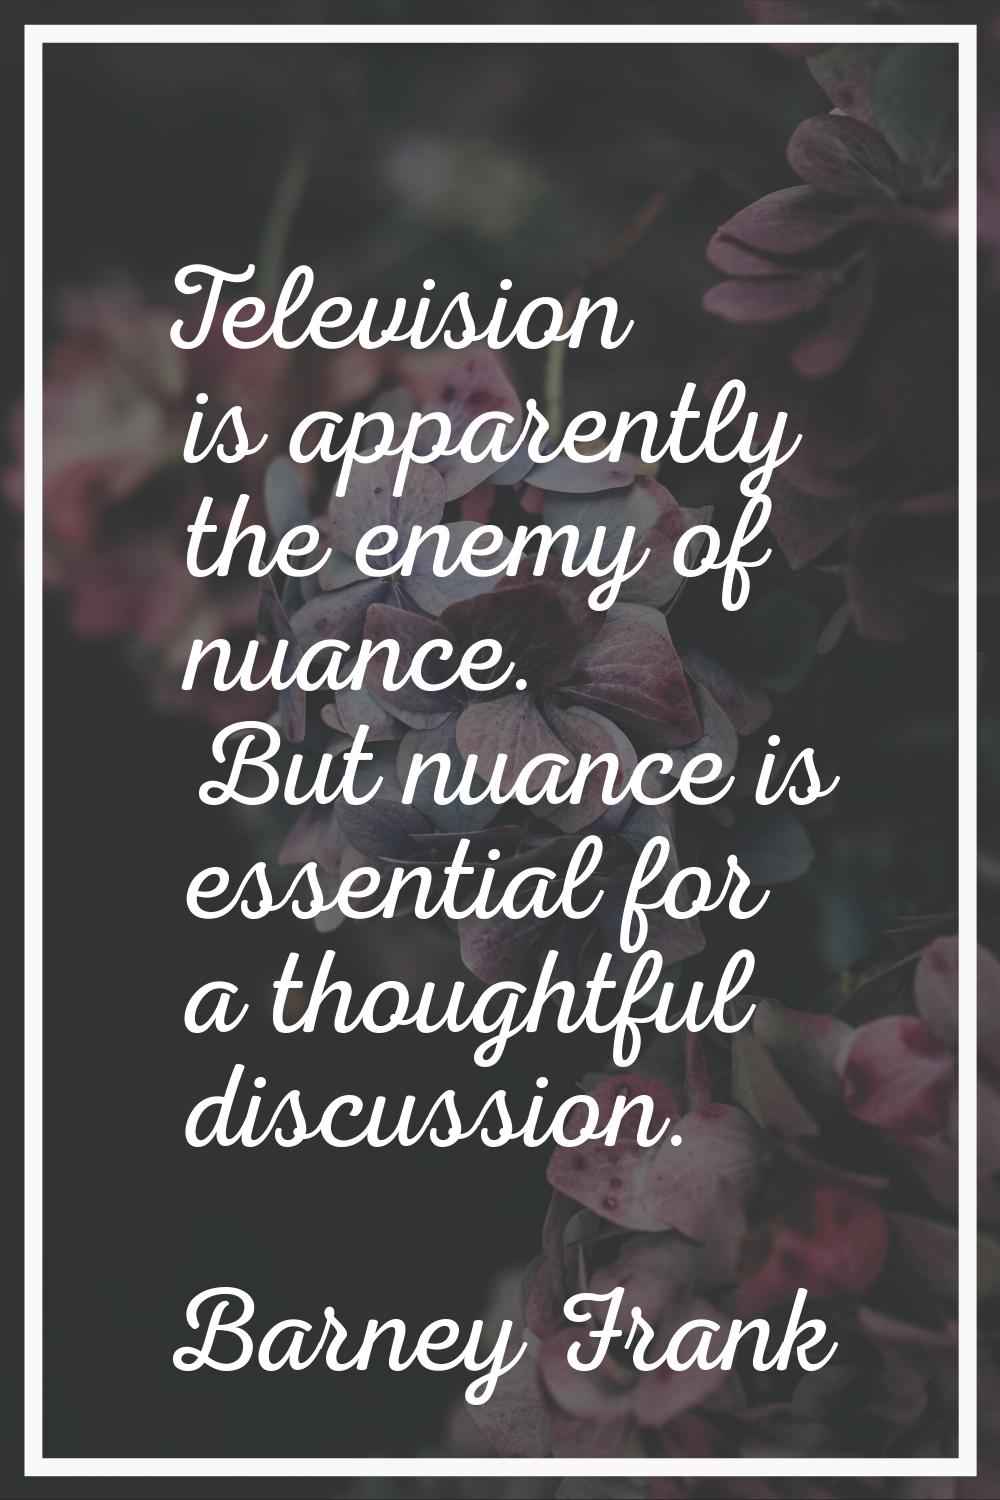 Television is apparently the enemy of nuance. But nuance is essential for a thoughtful discussion.